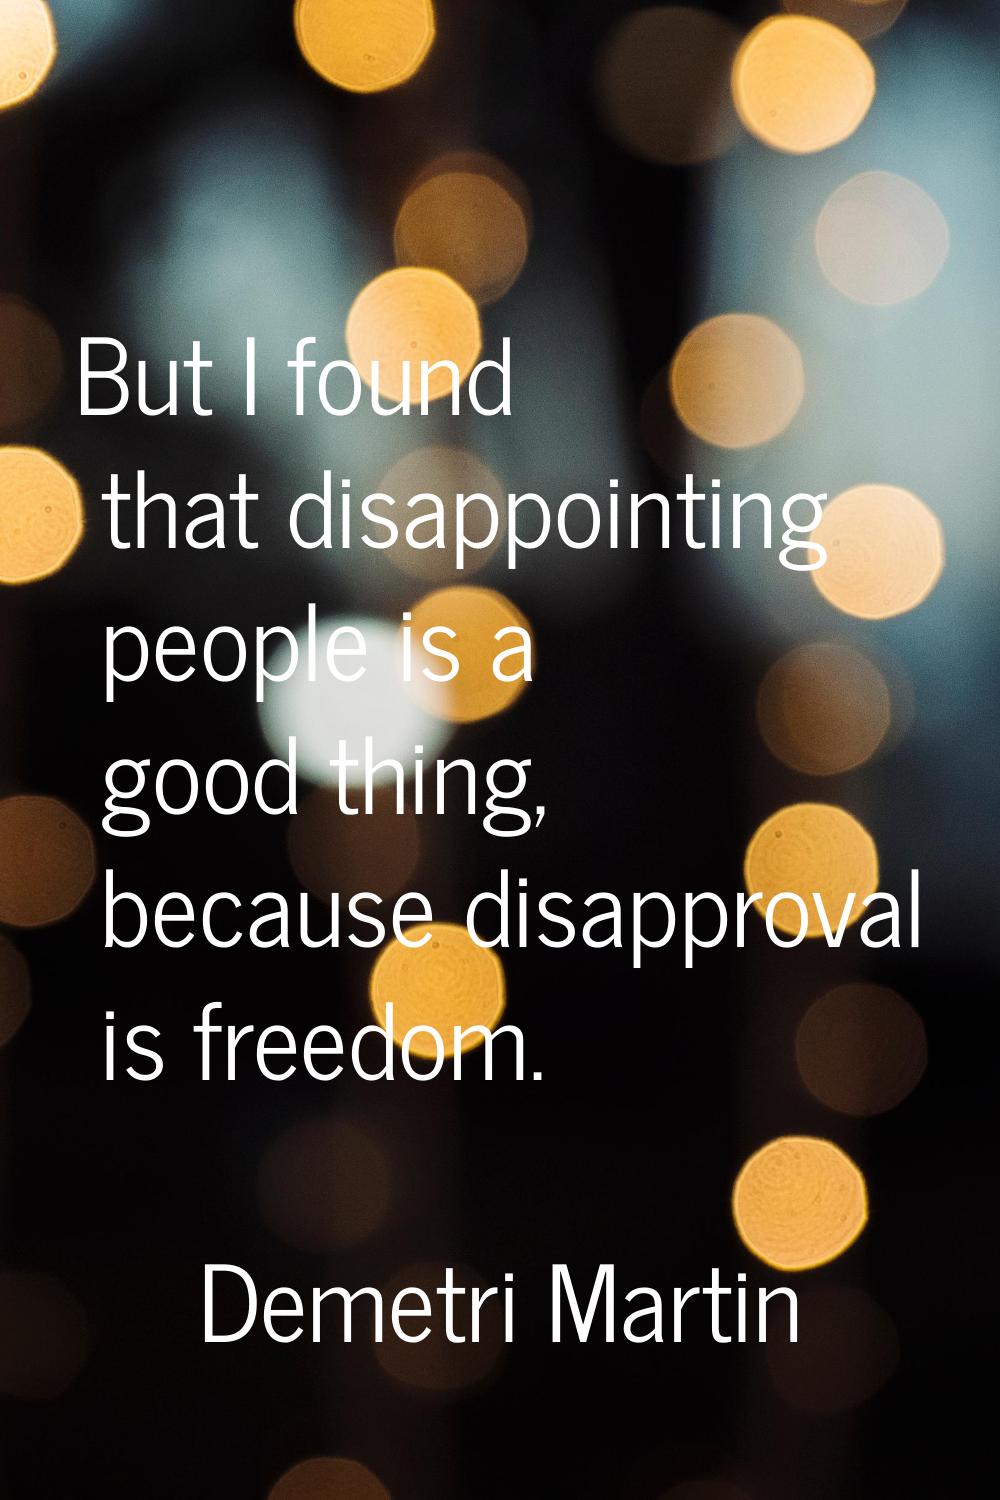 But I found that disappointing people is a good thing, because disapproval is freedom.